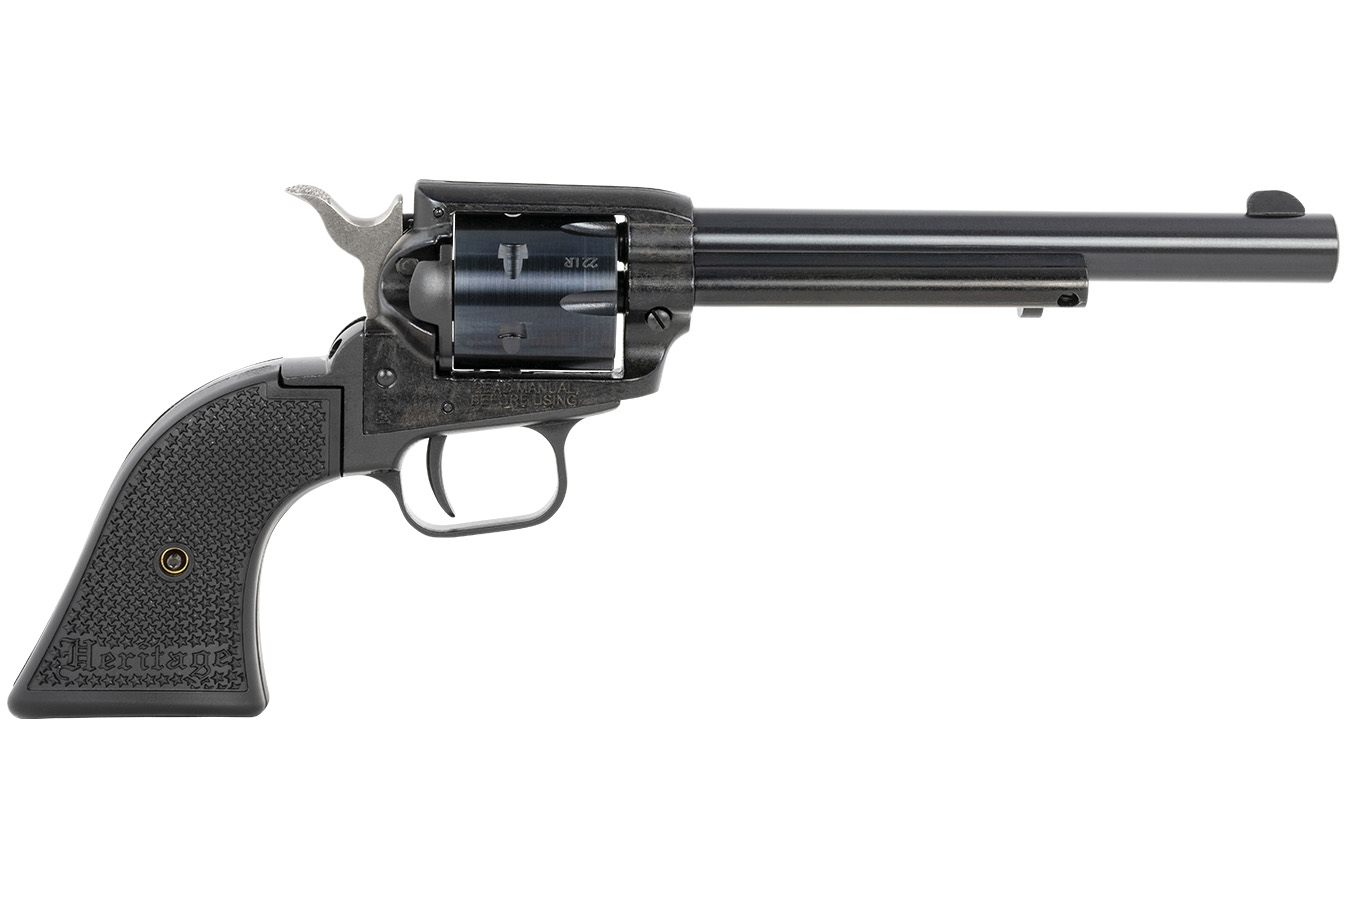 No. 17 Best Selling: HERITAGE ROUGH RIDER 22LR 6.5 BARREL 6ROUNDS POLY GRIP